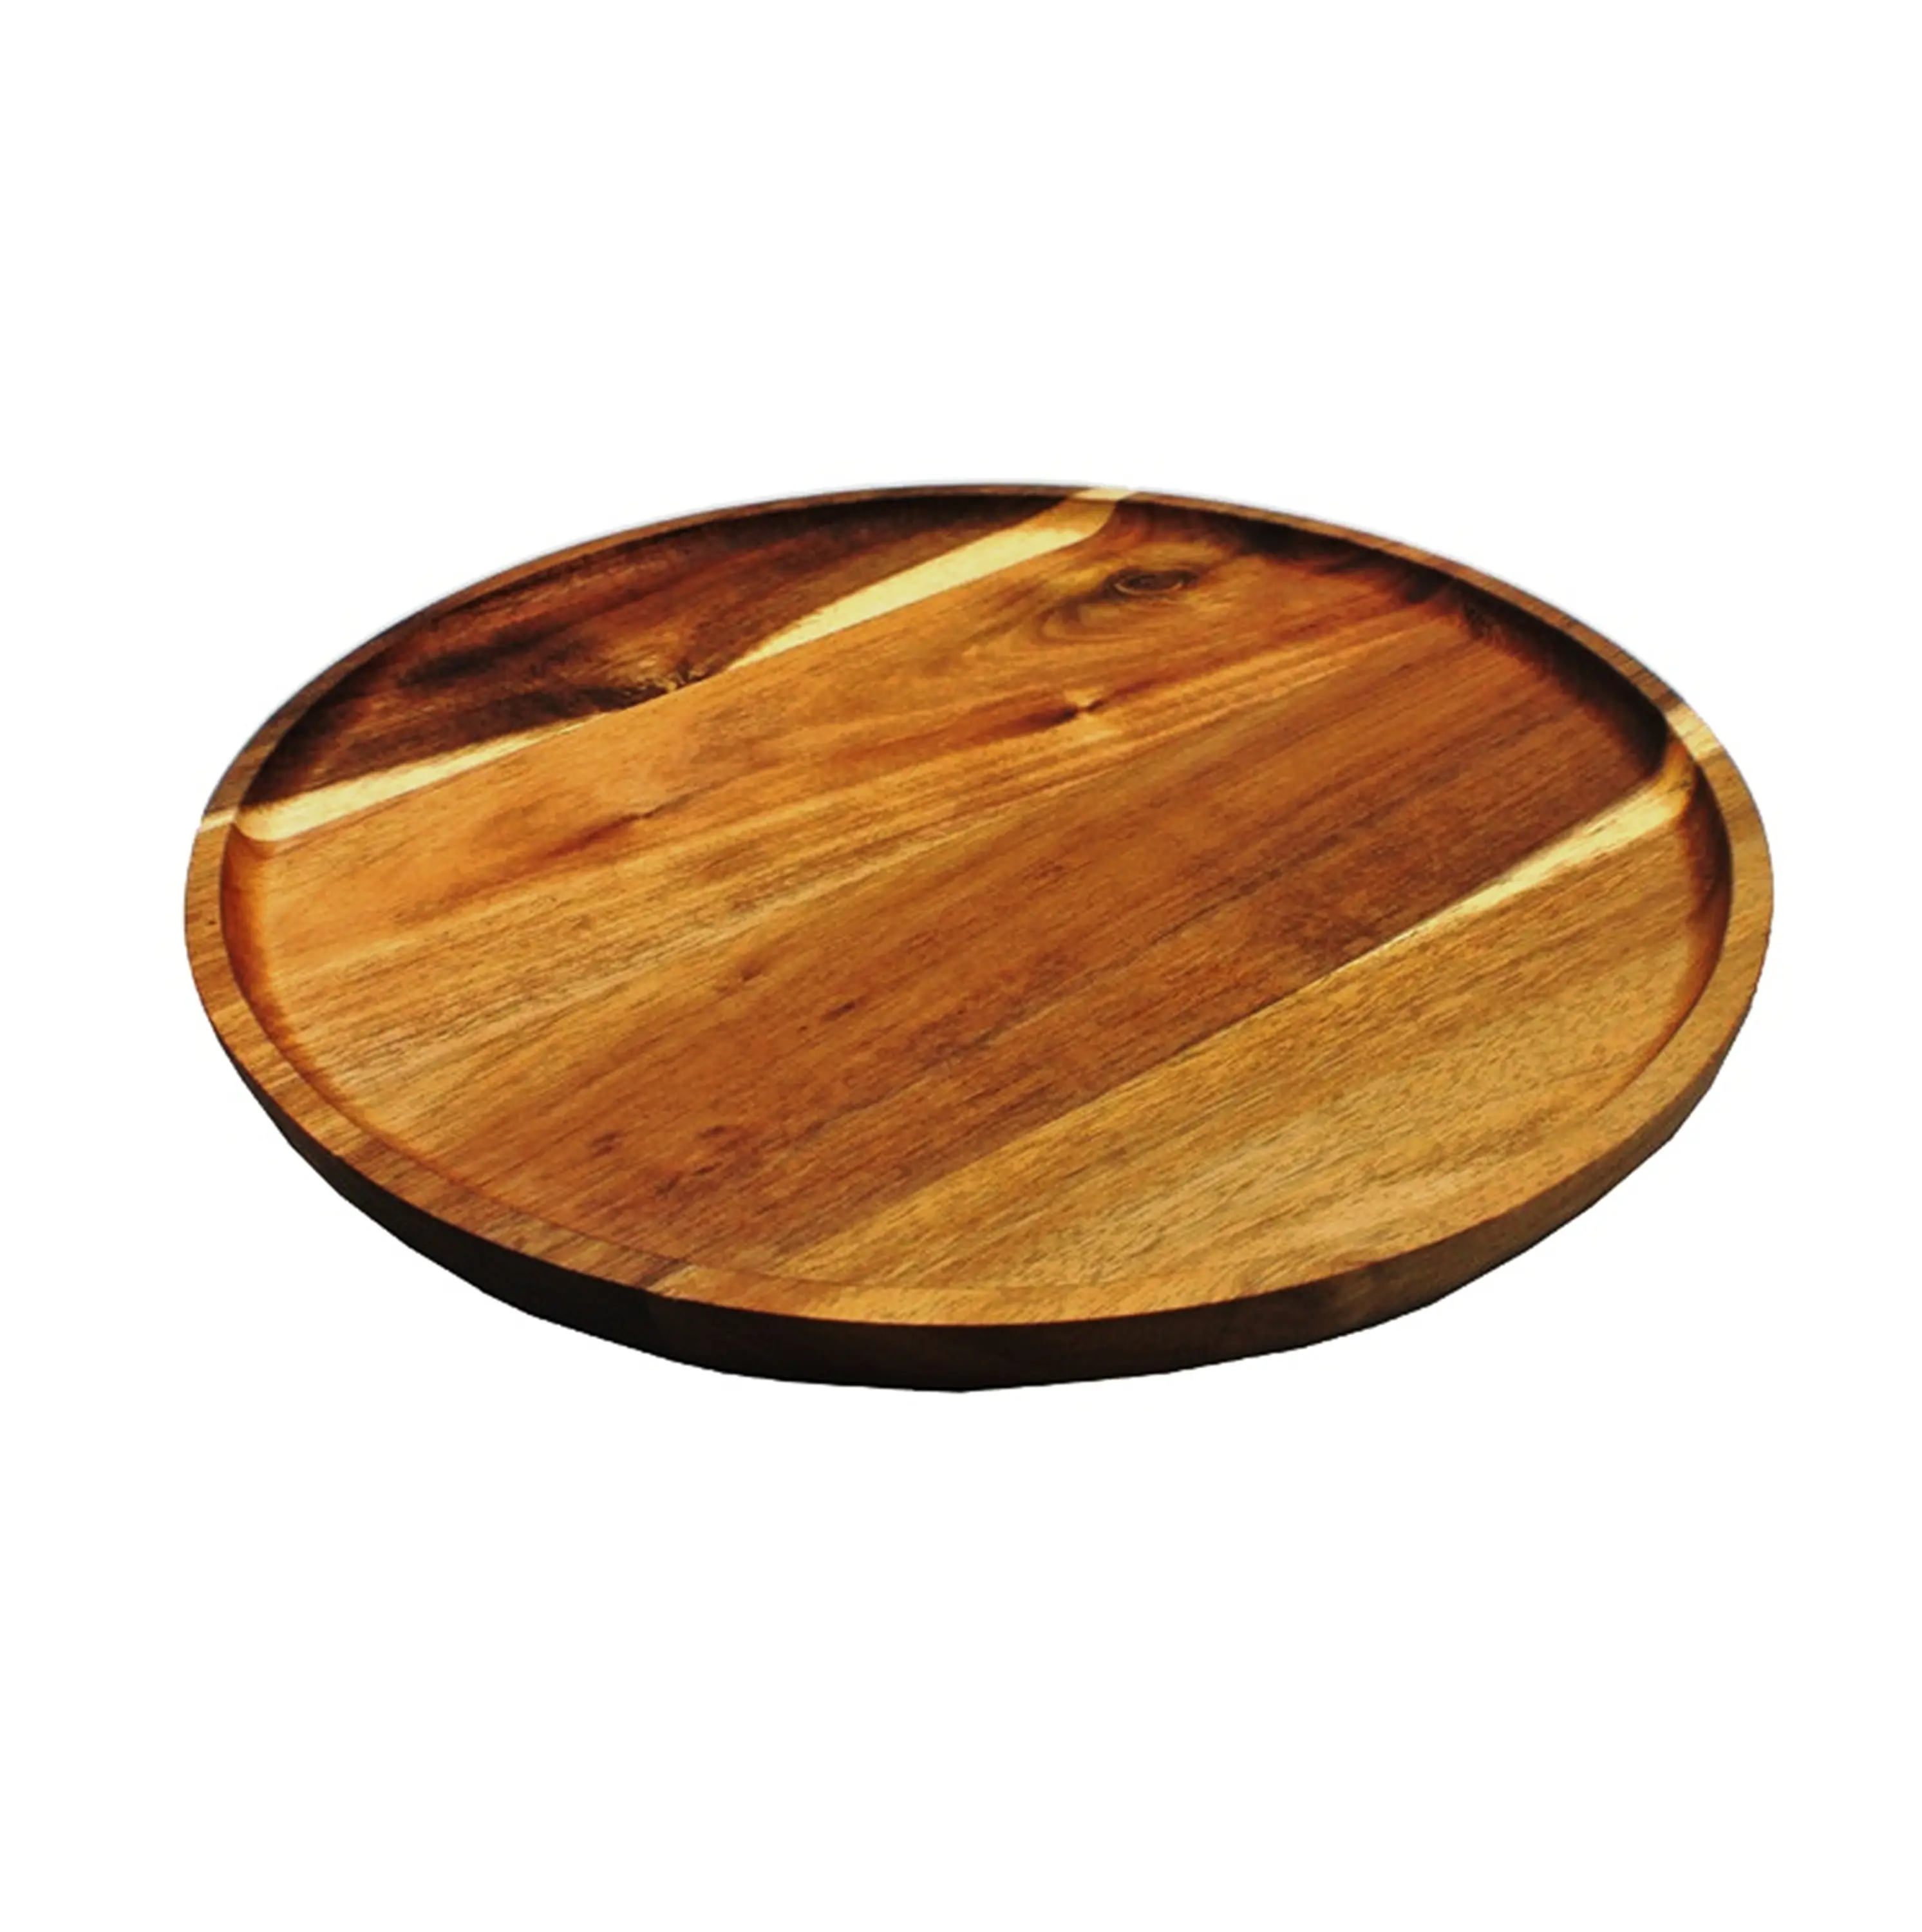 Premium Acacia Food Serving Charger Plate Wooden Serving Plate Handcrafted & Sustainable Top Quality Product